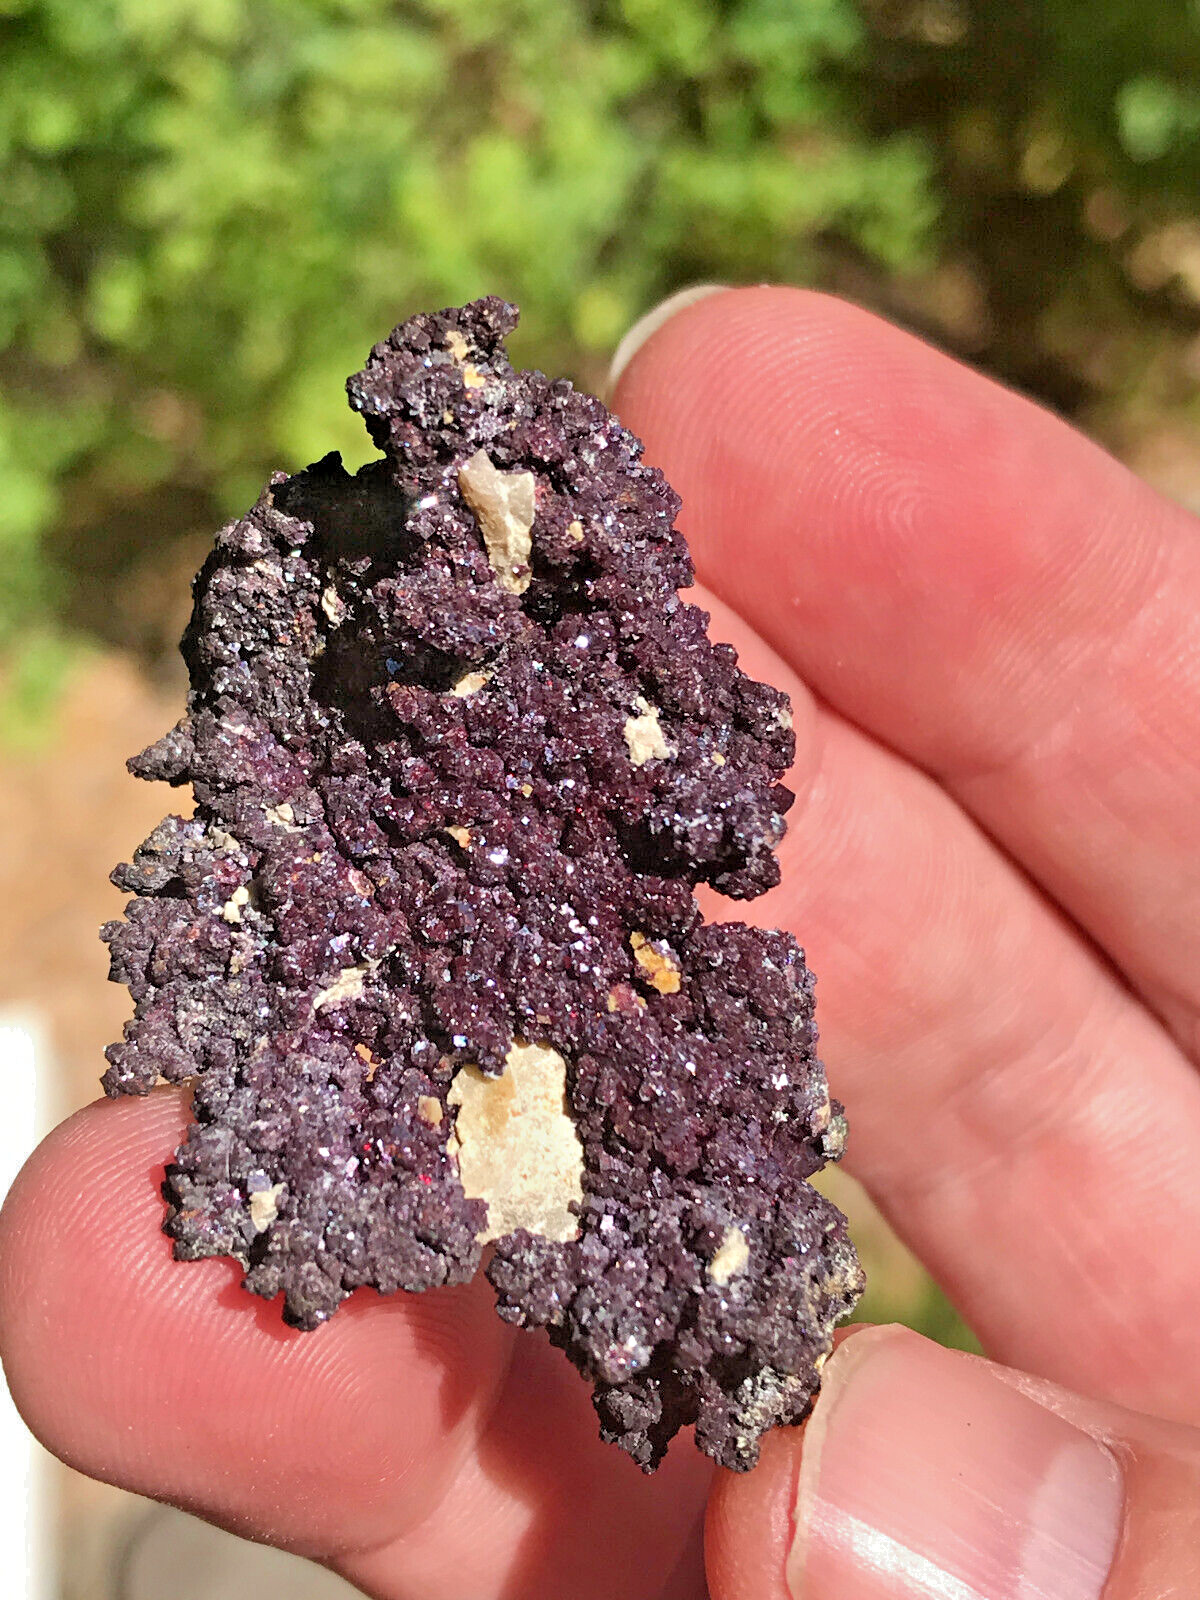 Cuprite crystals on native copper, Bisbee, AZ, USA, from an older collection